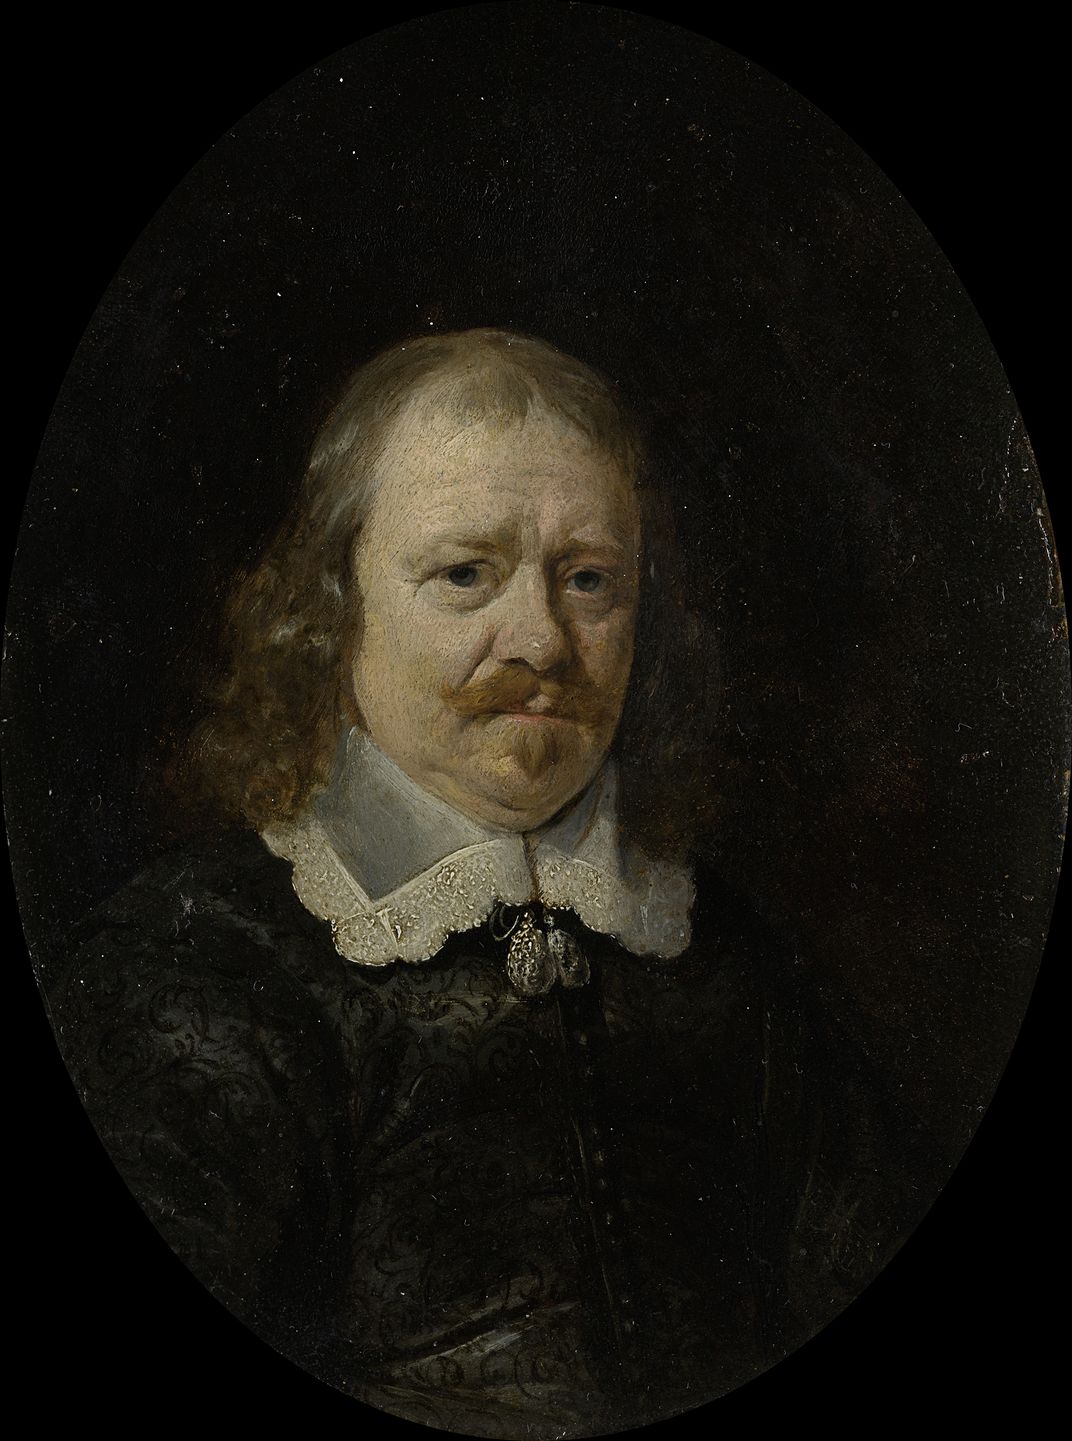 A portrait of an elderly white man in a white lace collar and black clothes, with a mustache and serious expression